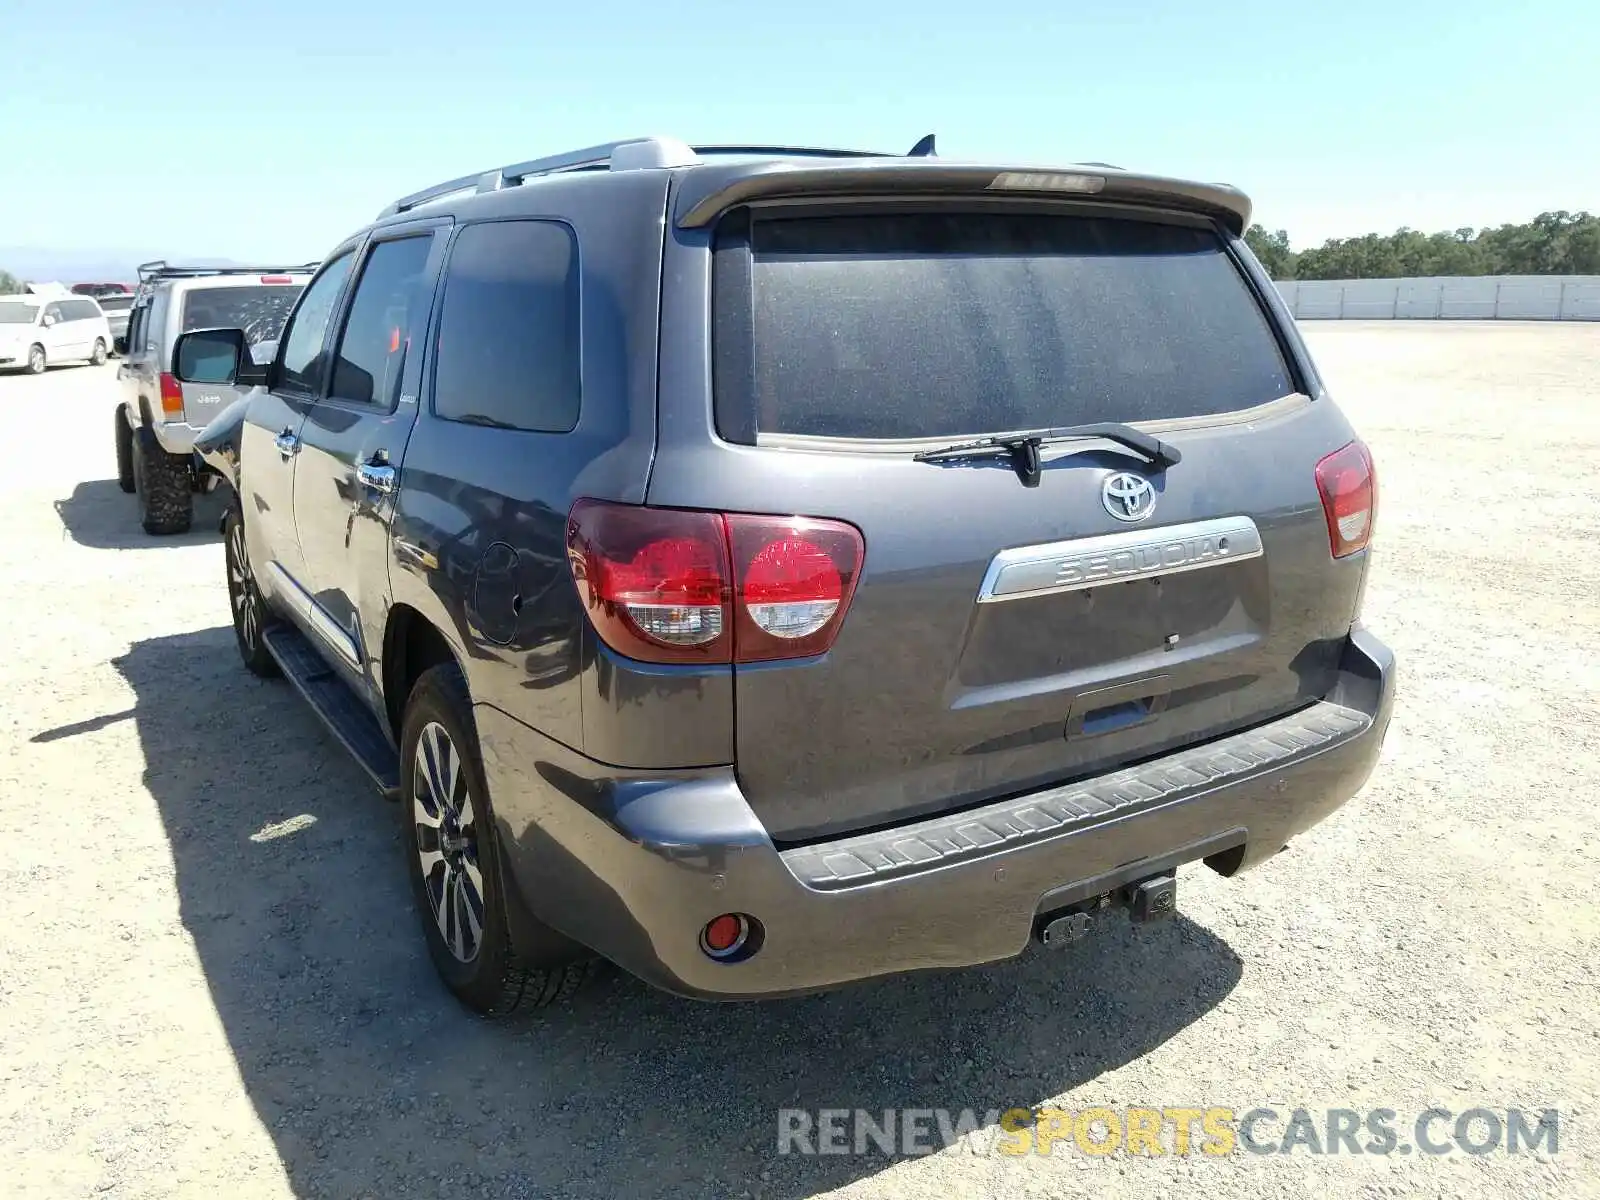 3 Photograph of a damaged car 5TDJY5G11KS165869 TOYOTA SEQUOIA 2019